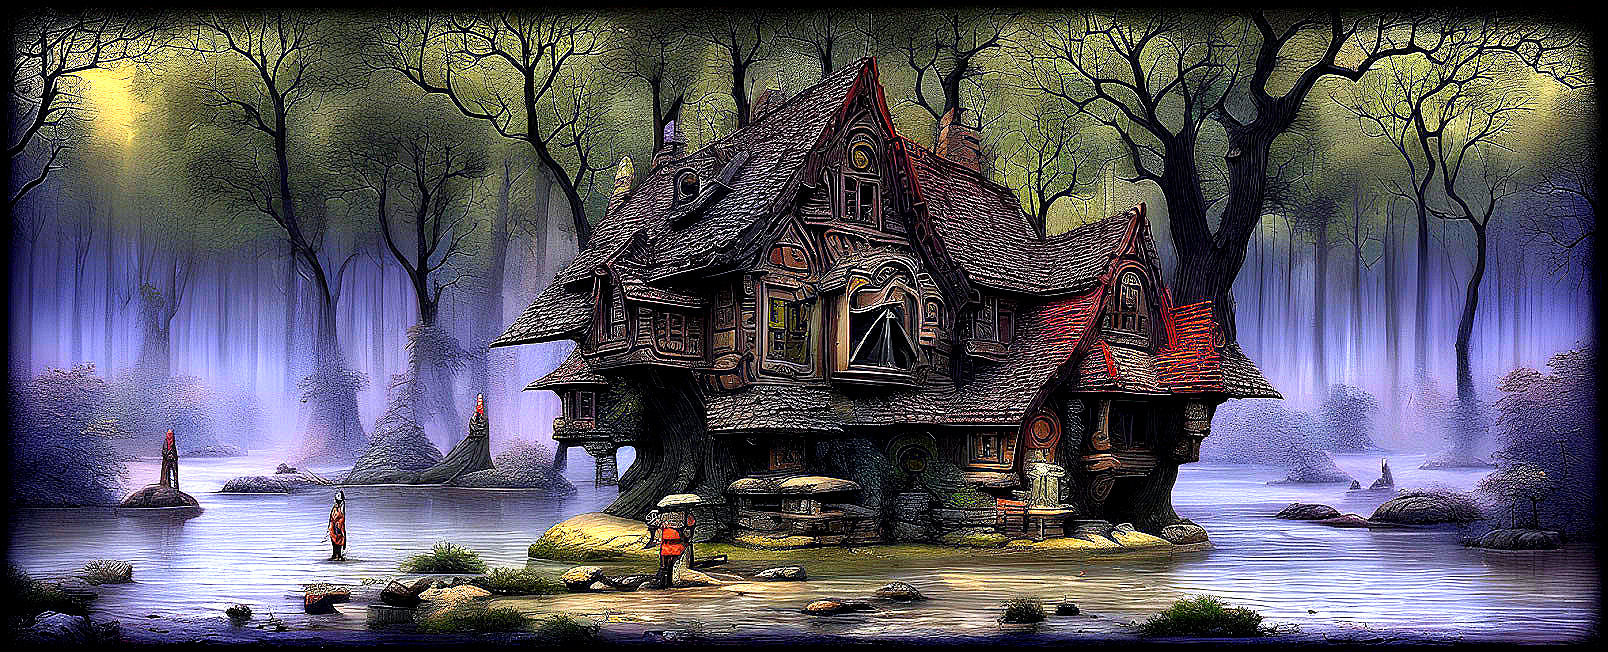 Enchanting cottage in mystical forest with serene pond